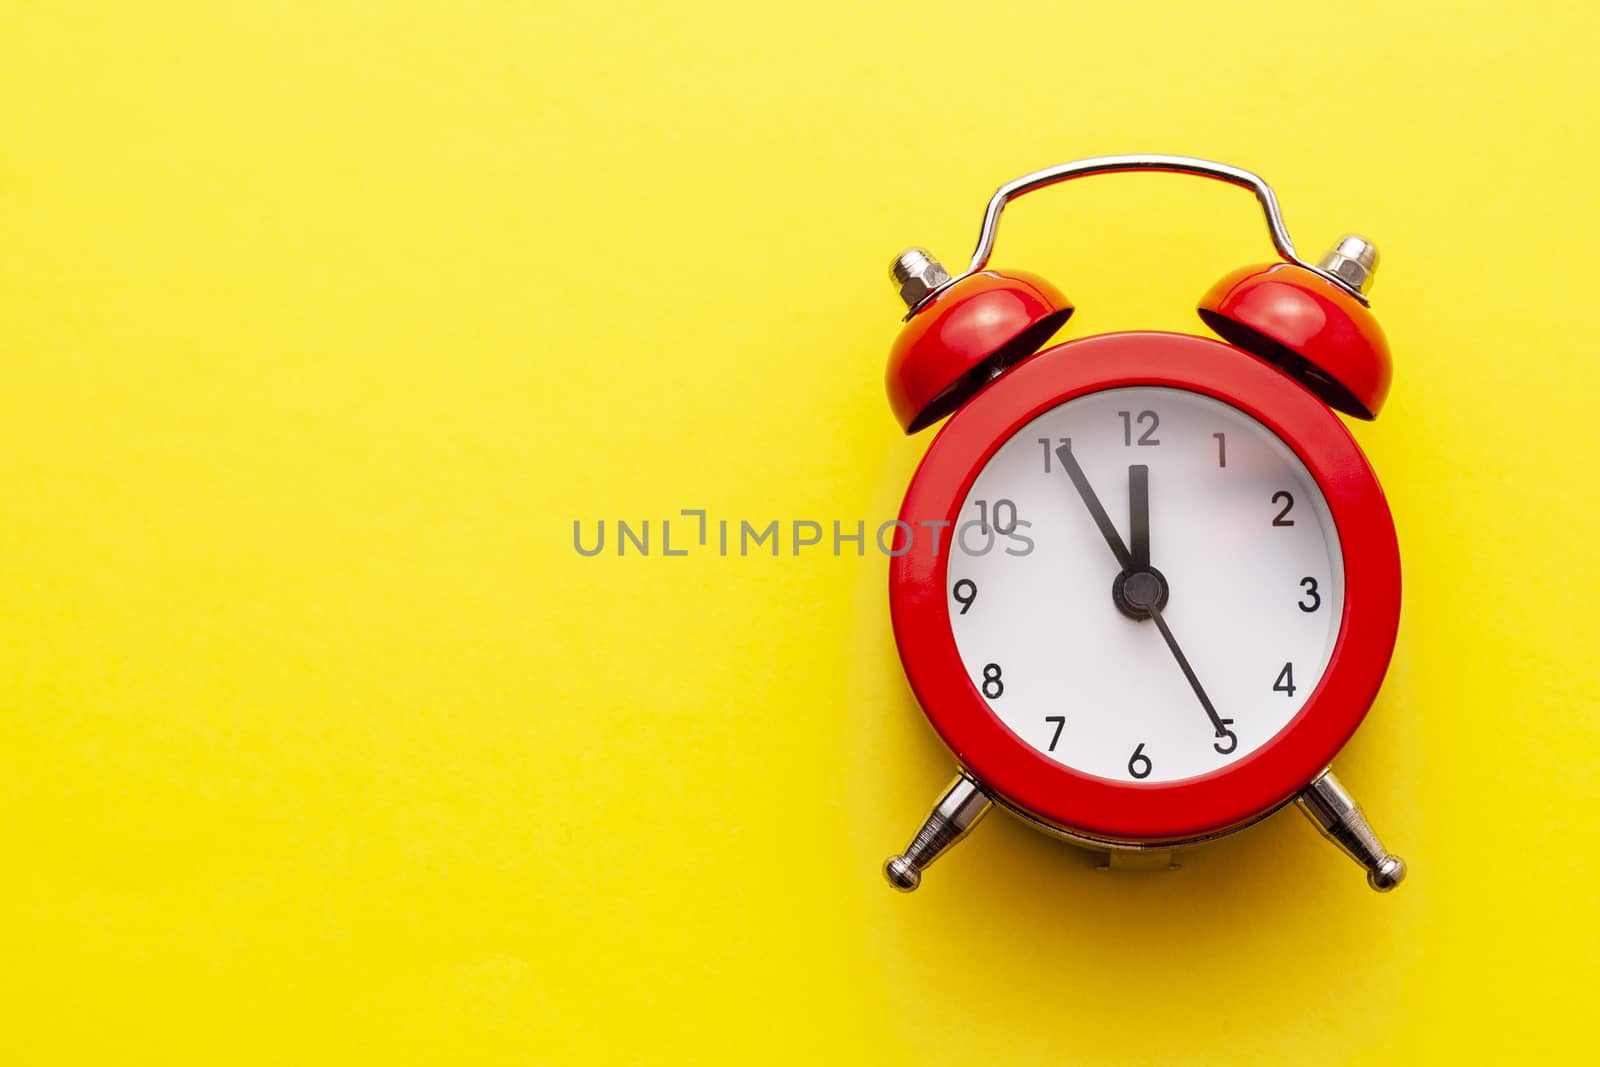 Colorful red traditional alarm clock with bells on a bright yellow background with copy space placed to the side